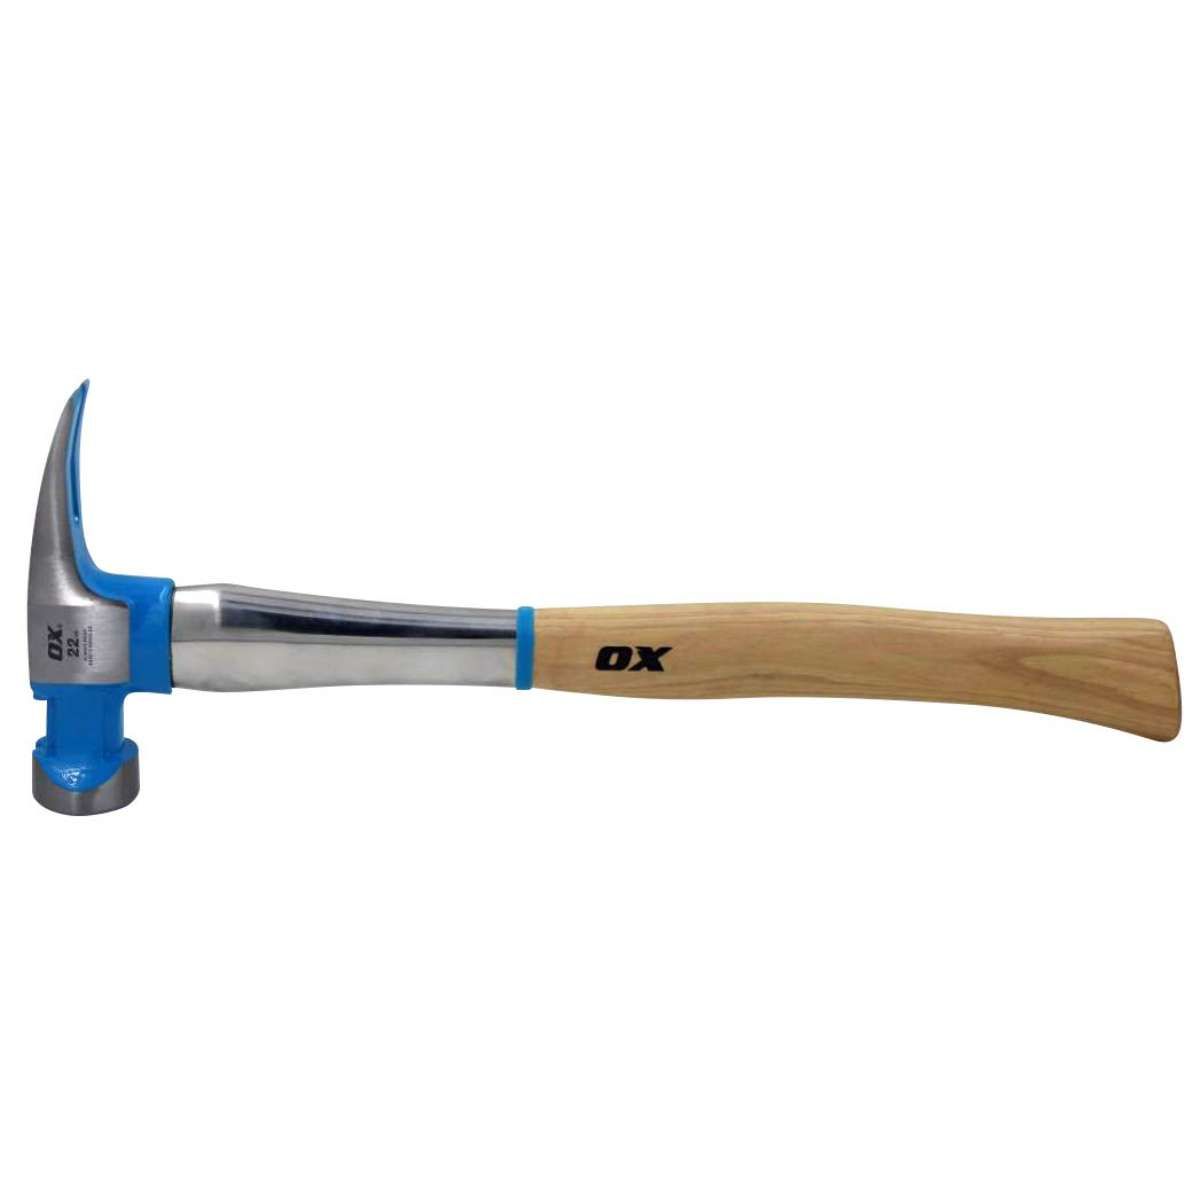 17-3/4" Hickory Curved Handle 22 oz. Steel Head Round Milled Face Straight Claw Ox-Pro Framing Hammer w/ Steel Reinforced Shaft